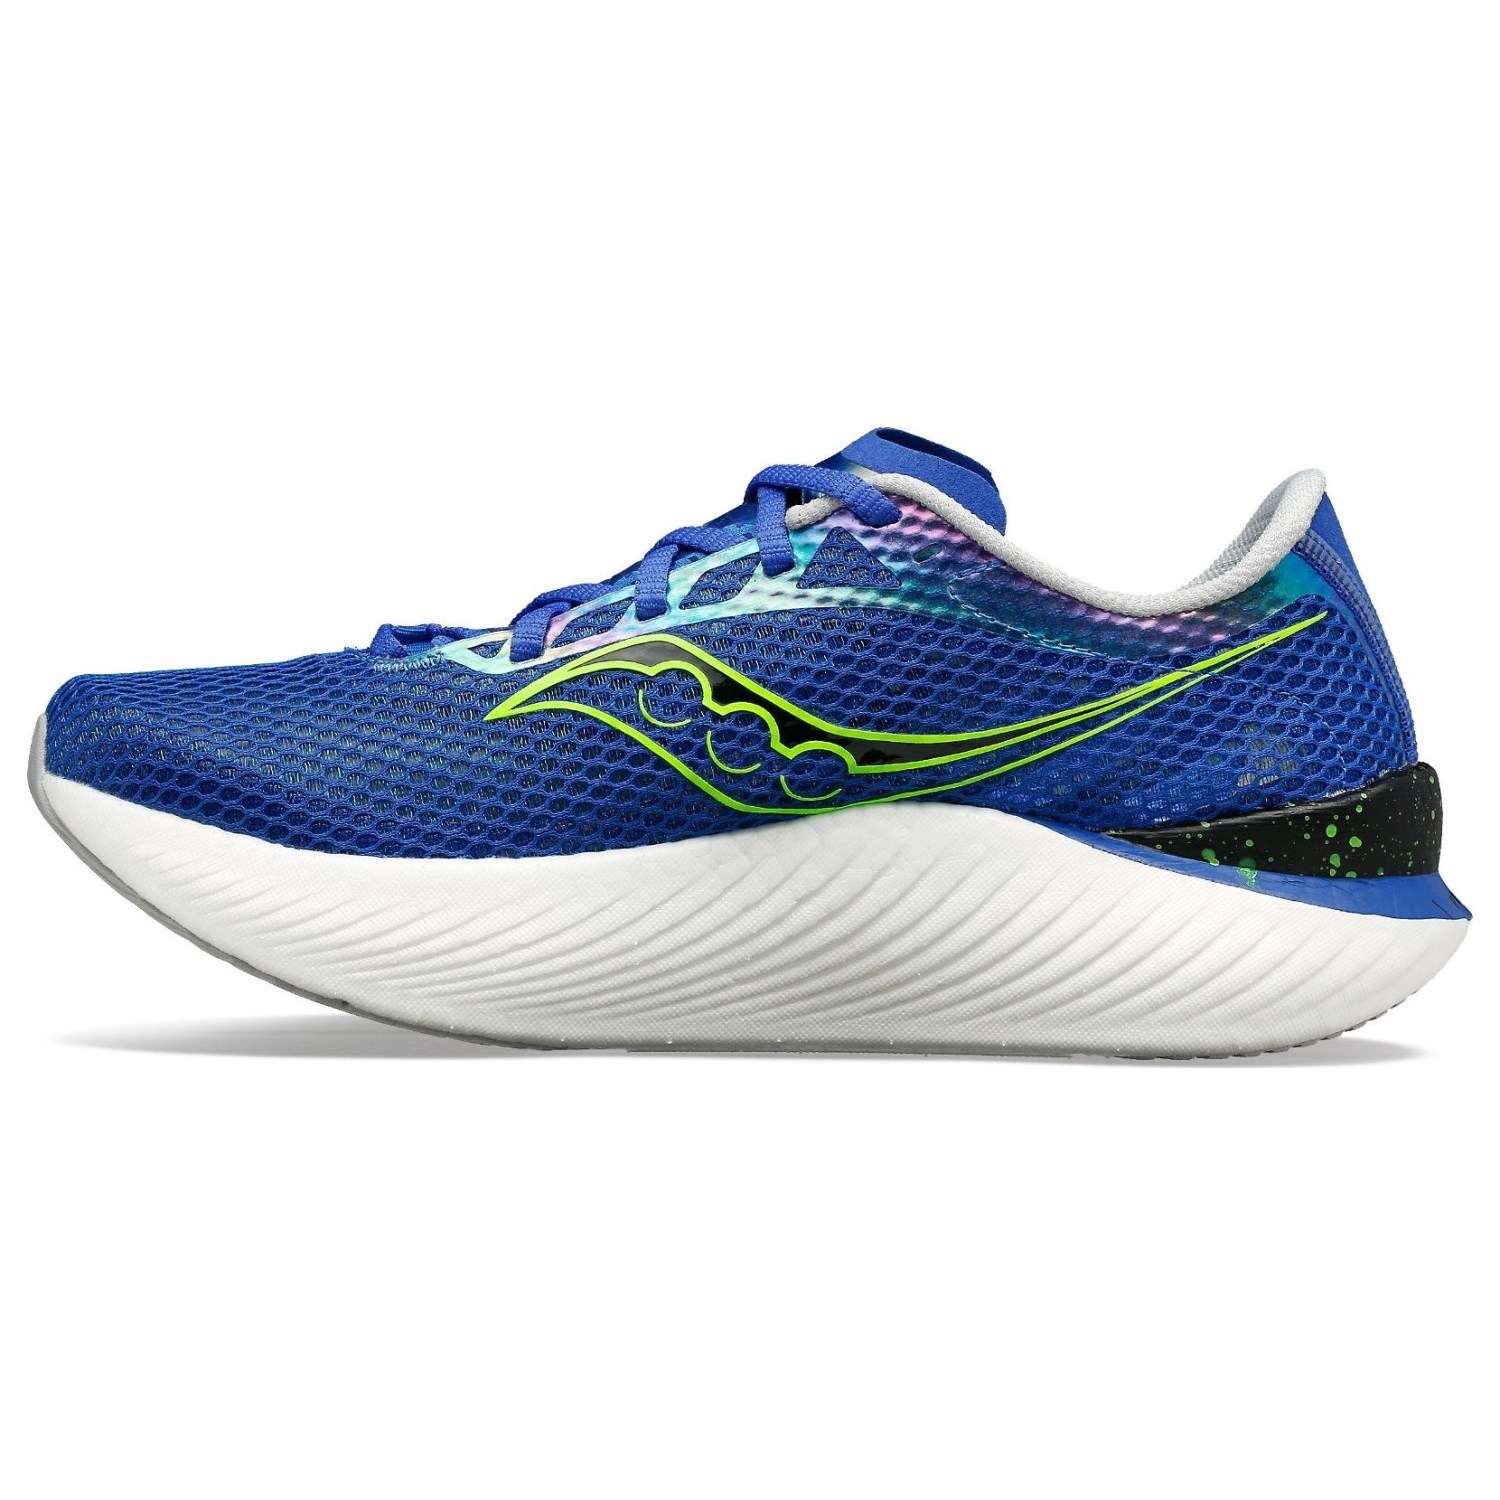 Saucony Endorphin Pro 3 - Mens Road Racing Shoes - Superblue/Slime ...